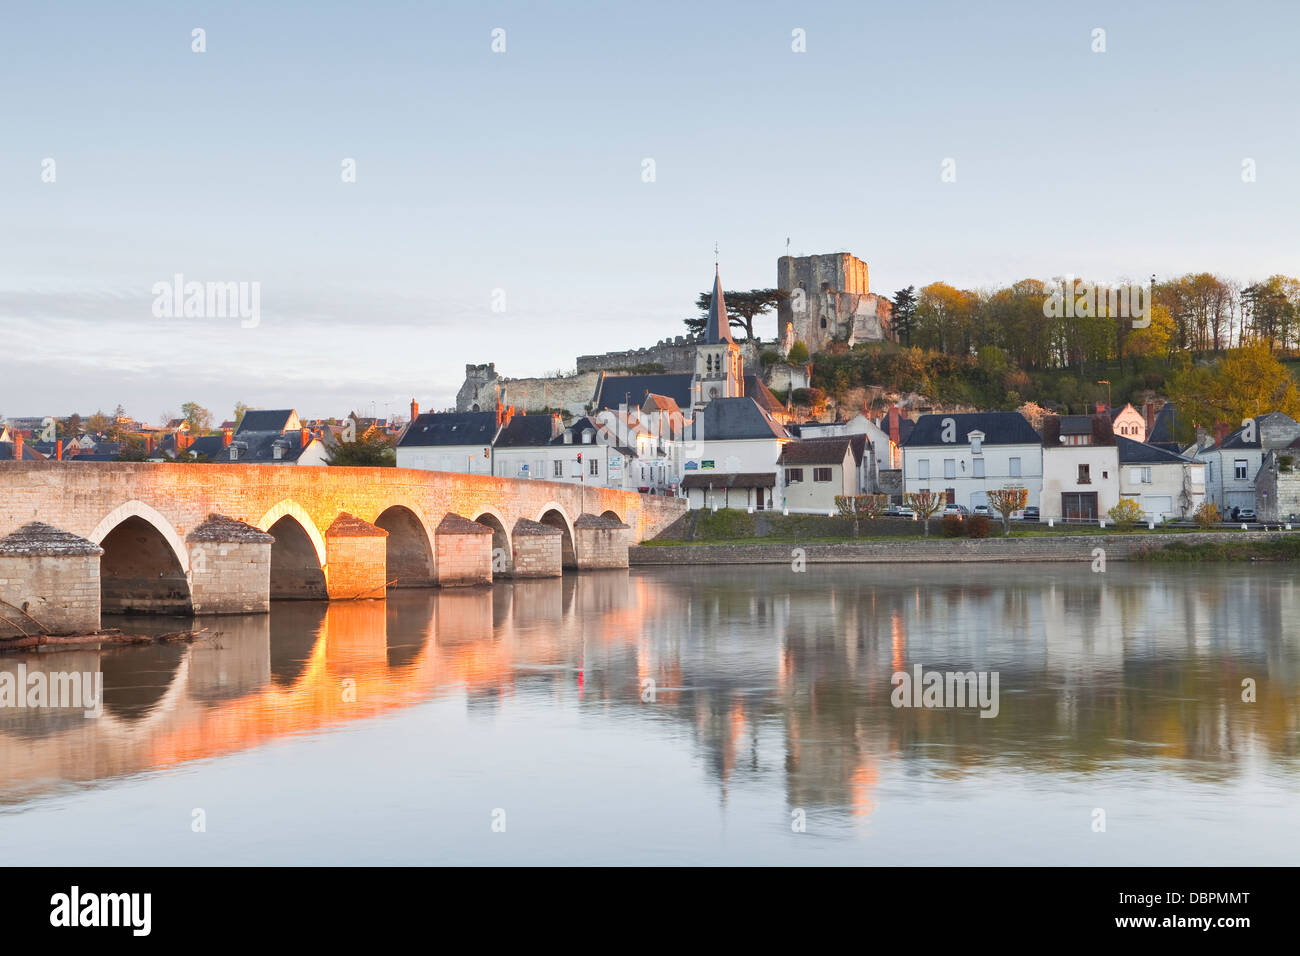 The small town of Montrichard and the River Cher, Loir-et-Cher, France, Europe Stock Photo